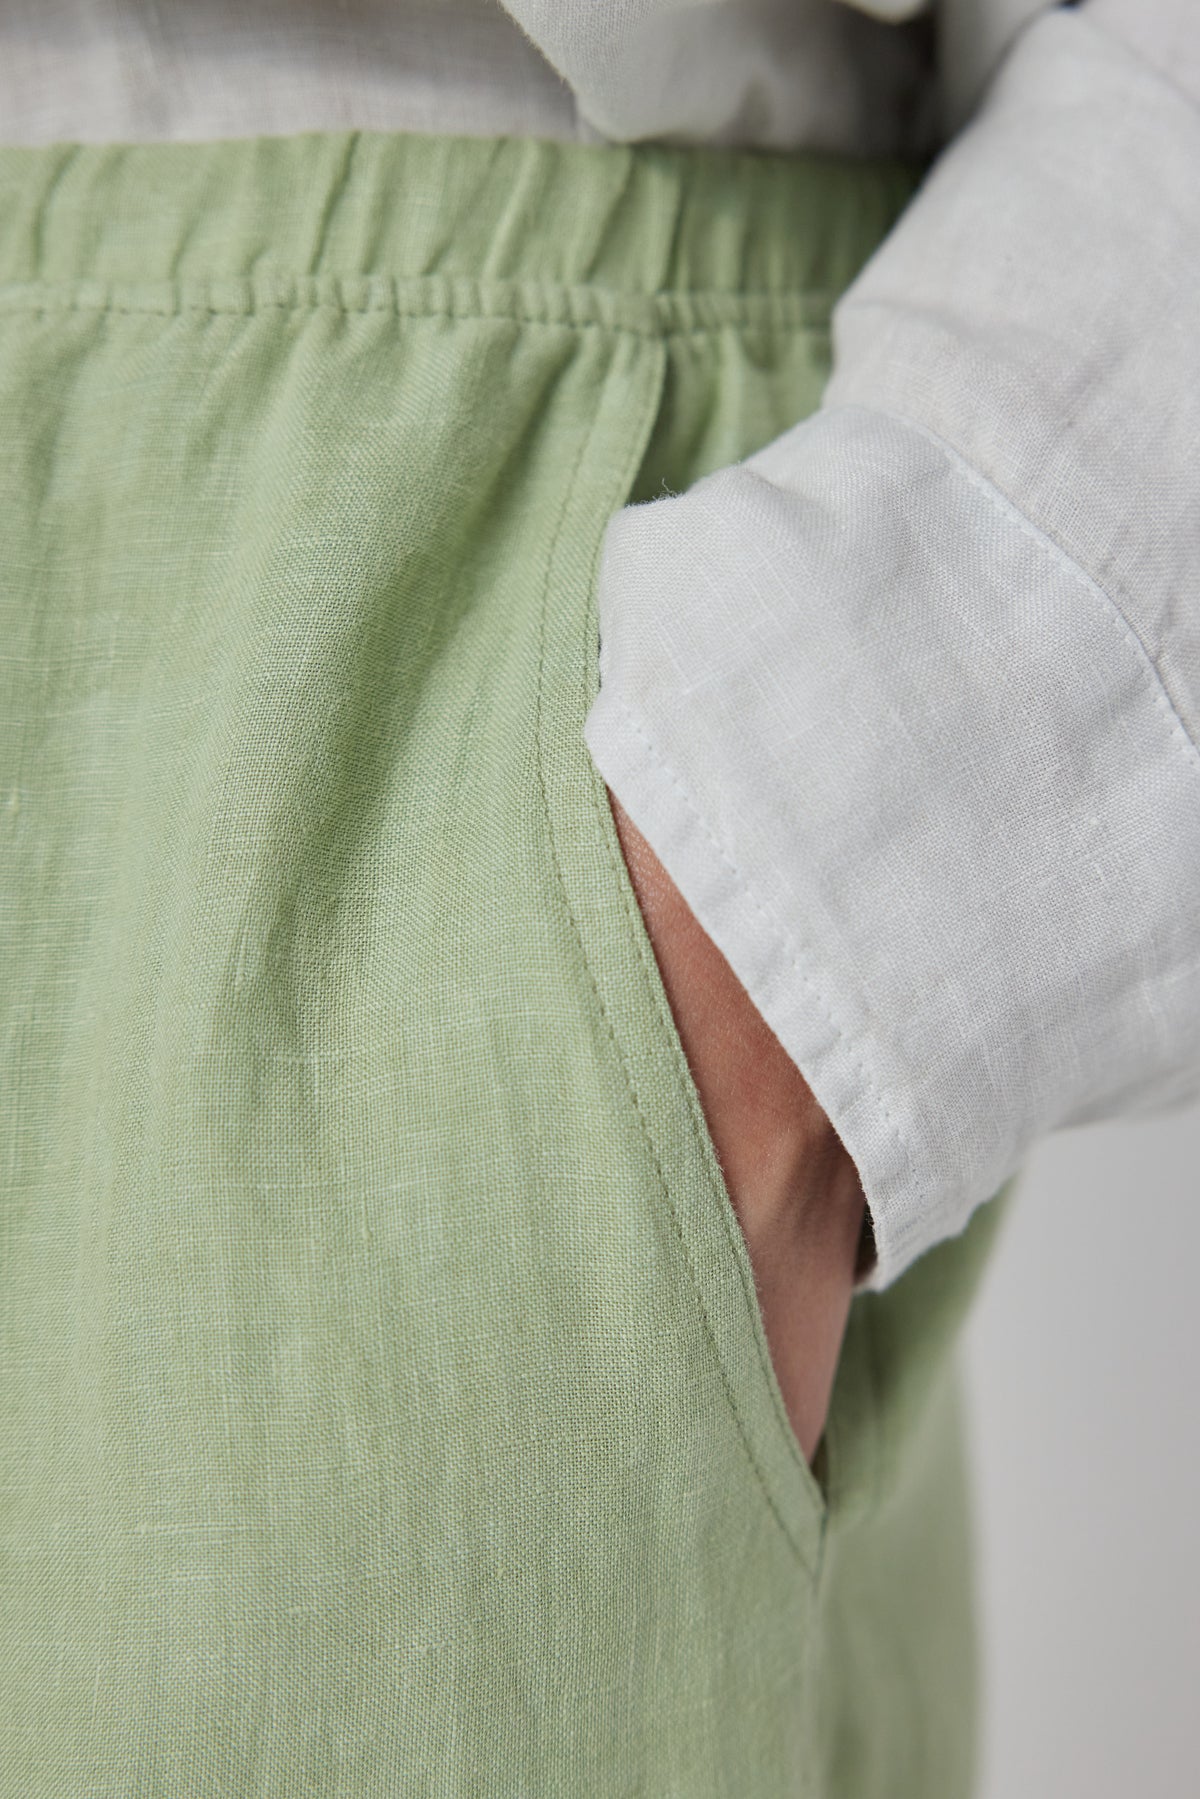   Close-up of a person wearing Velvet by Jenny Graham's PICO LINEN PANT in green, with a white shirt partially tucked in, focusing on the elastic waist and fabric detail. 